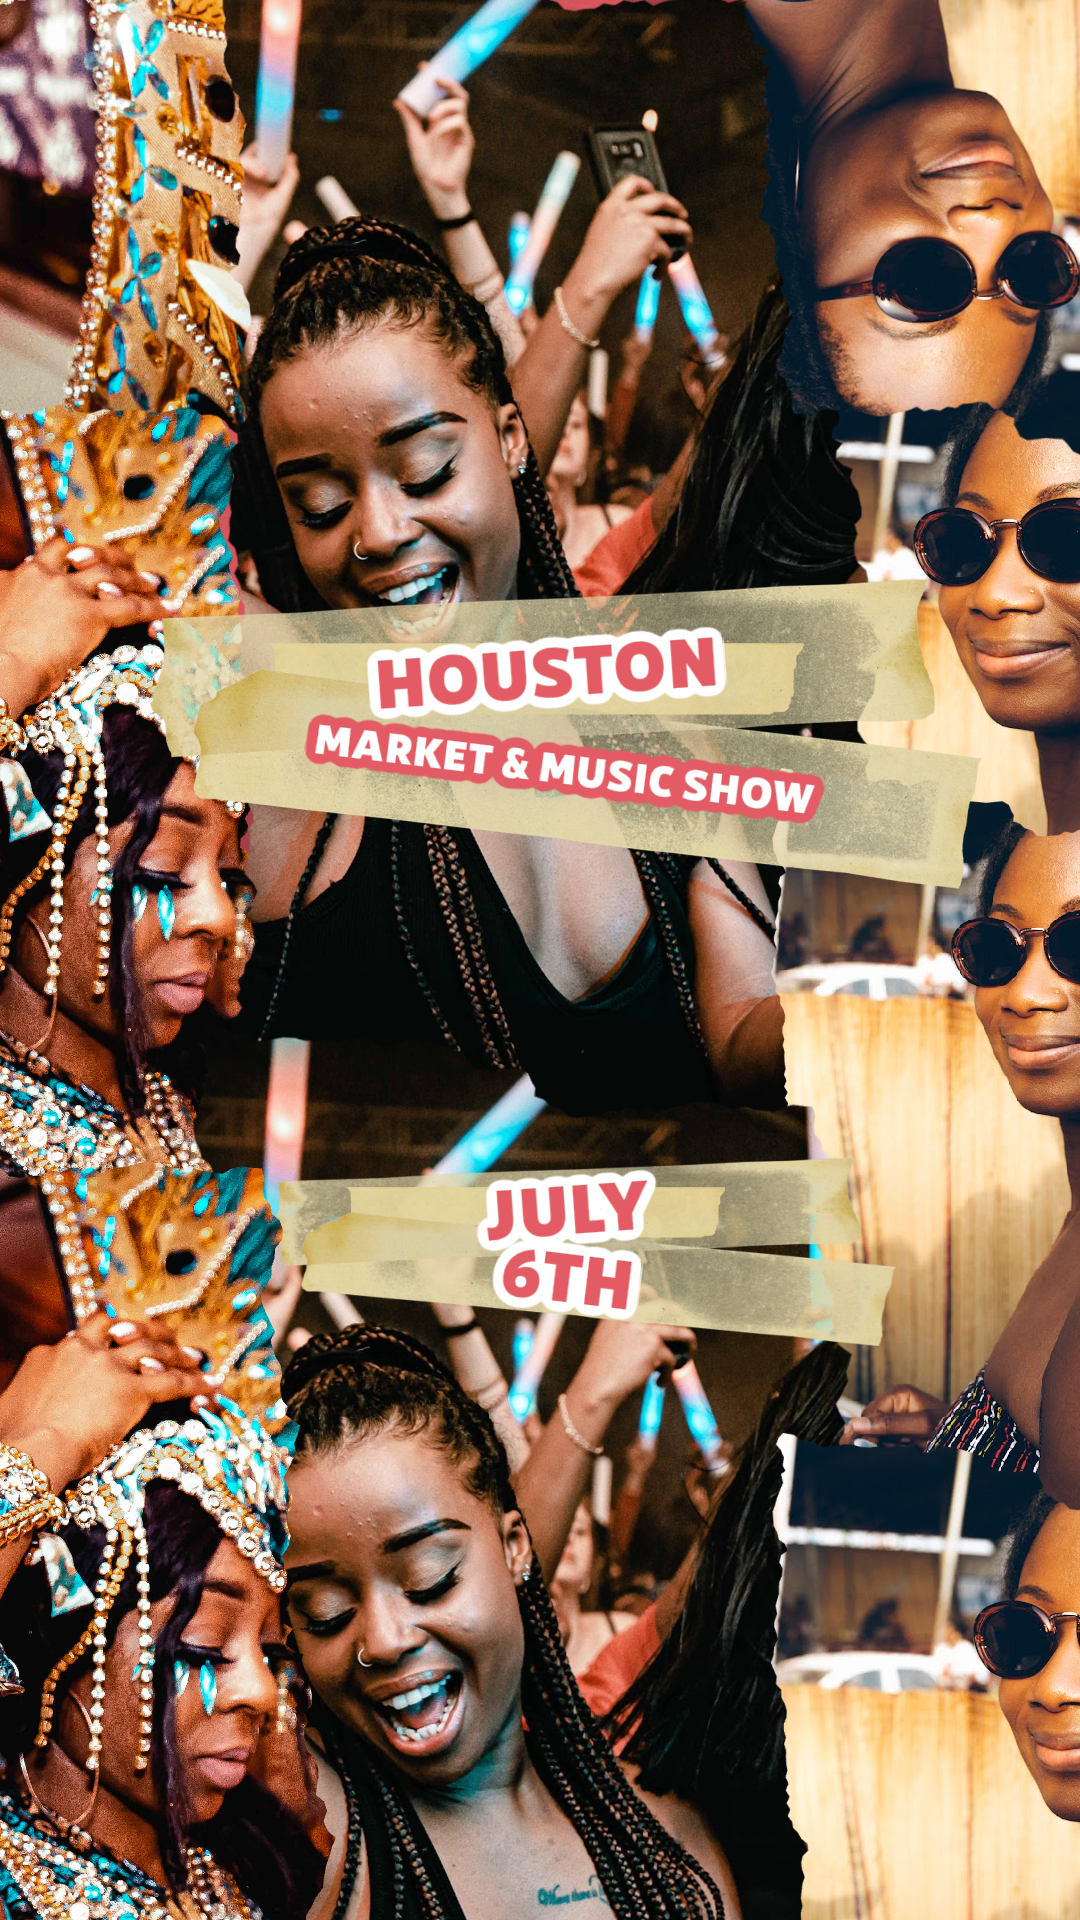 AfroSocaLove : Houston Party & BlackOwned Market (Feat Maga Stories & More) - Afro Soca Love Supply